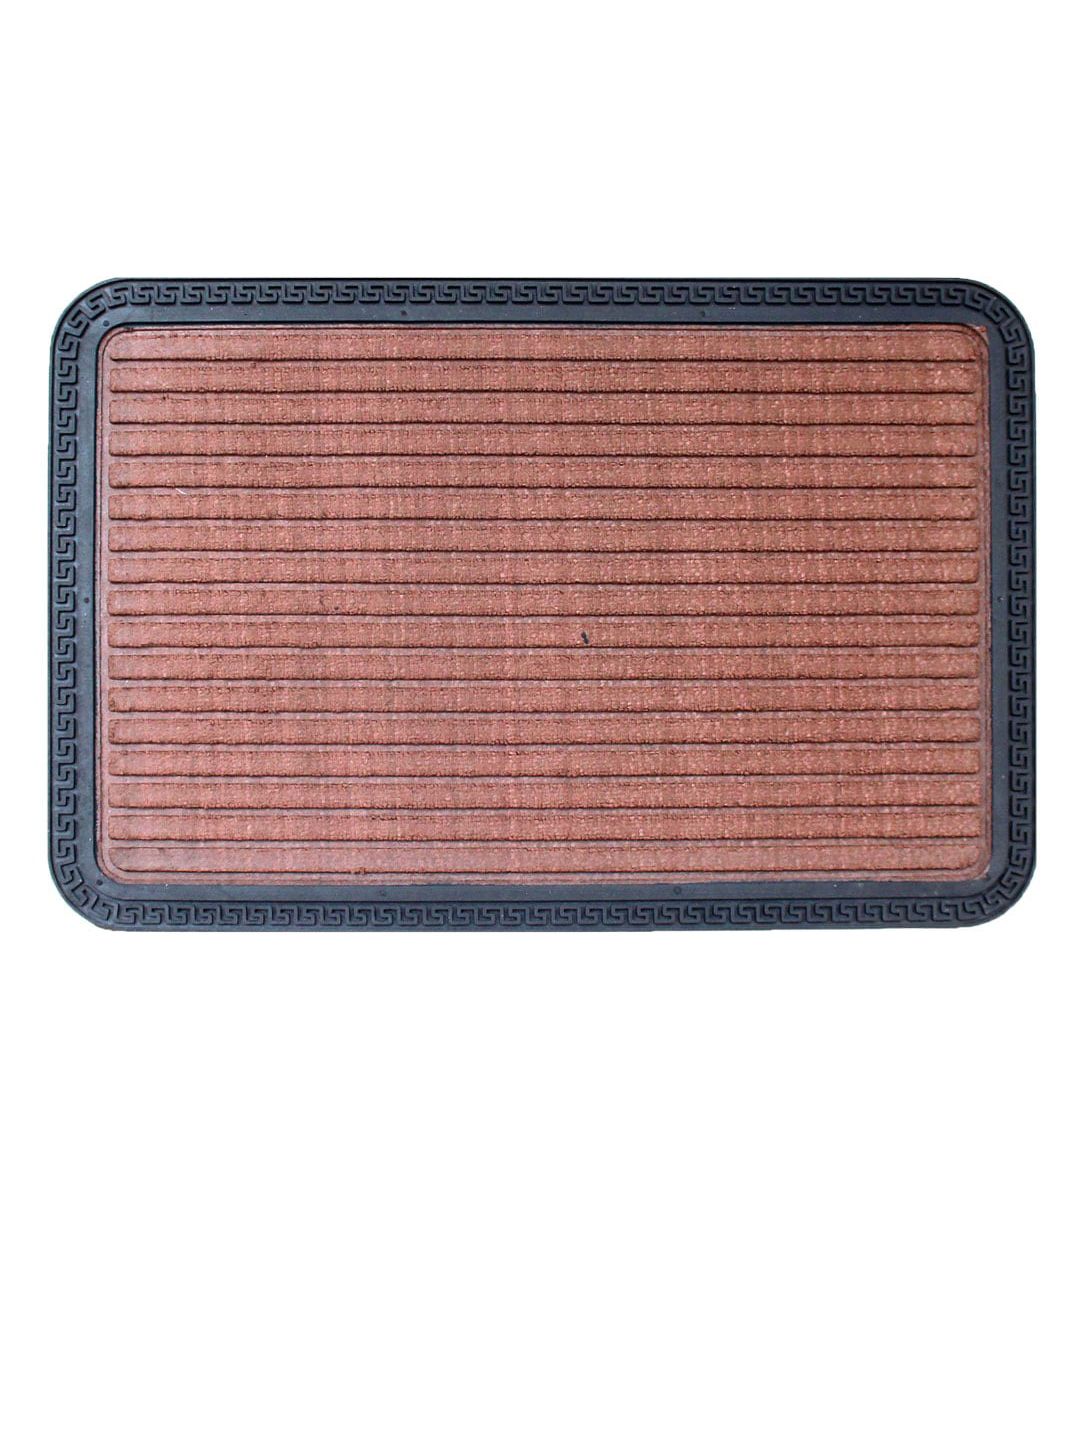 LUXEHOME INTERNATIONAL Red & Black Solid Anti-Skid Doormats Price in India